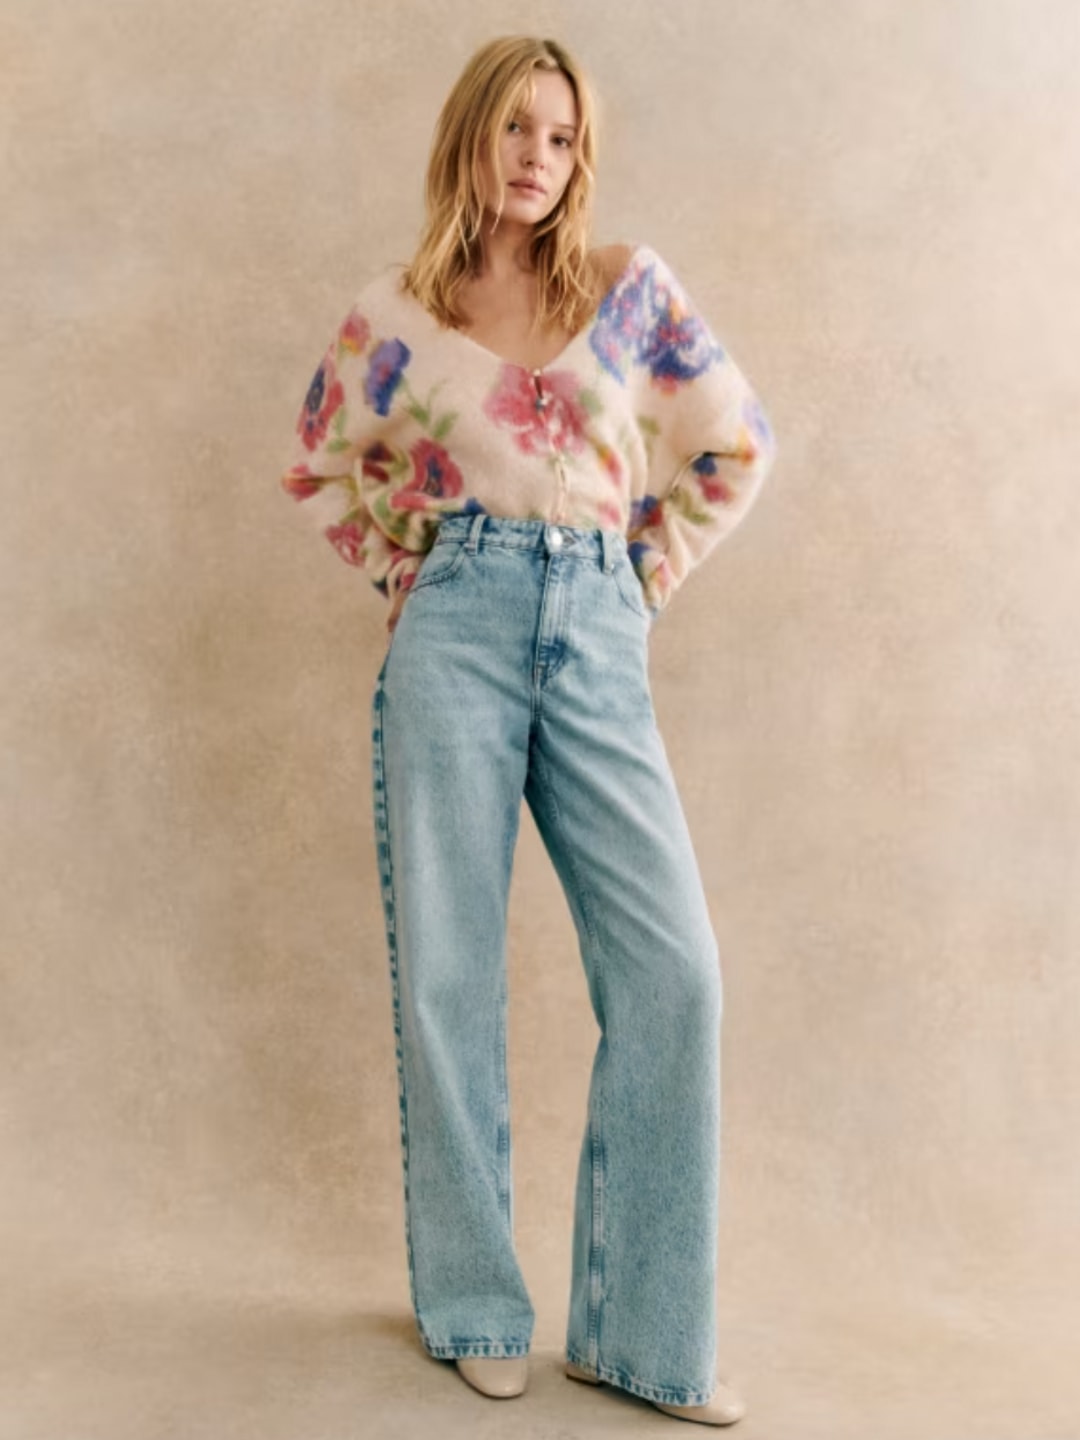 Sezane model wearing a floral cardigan and jeans 